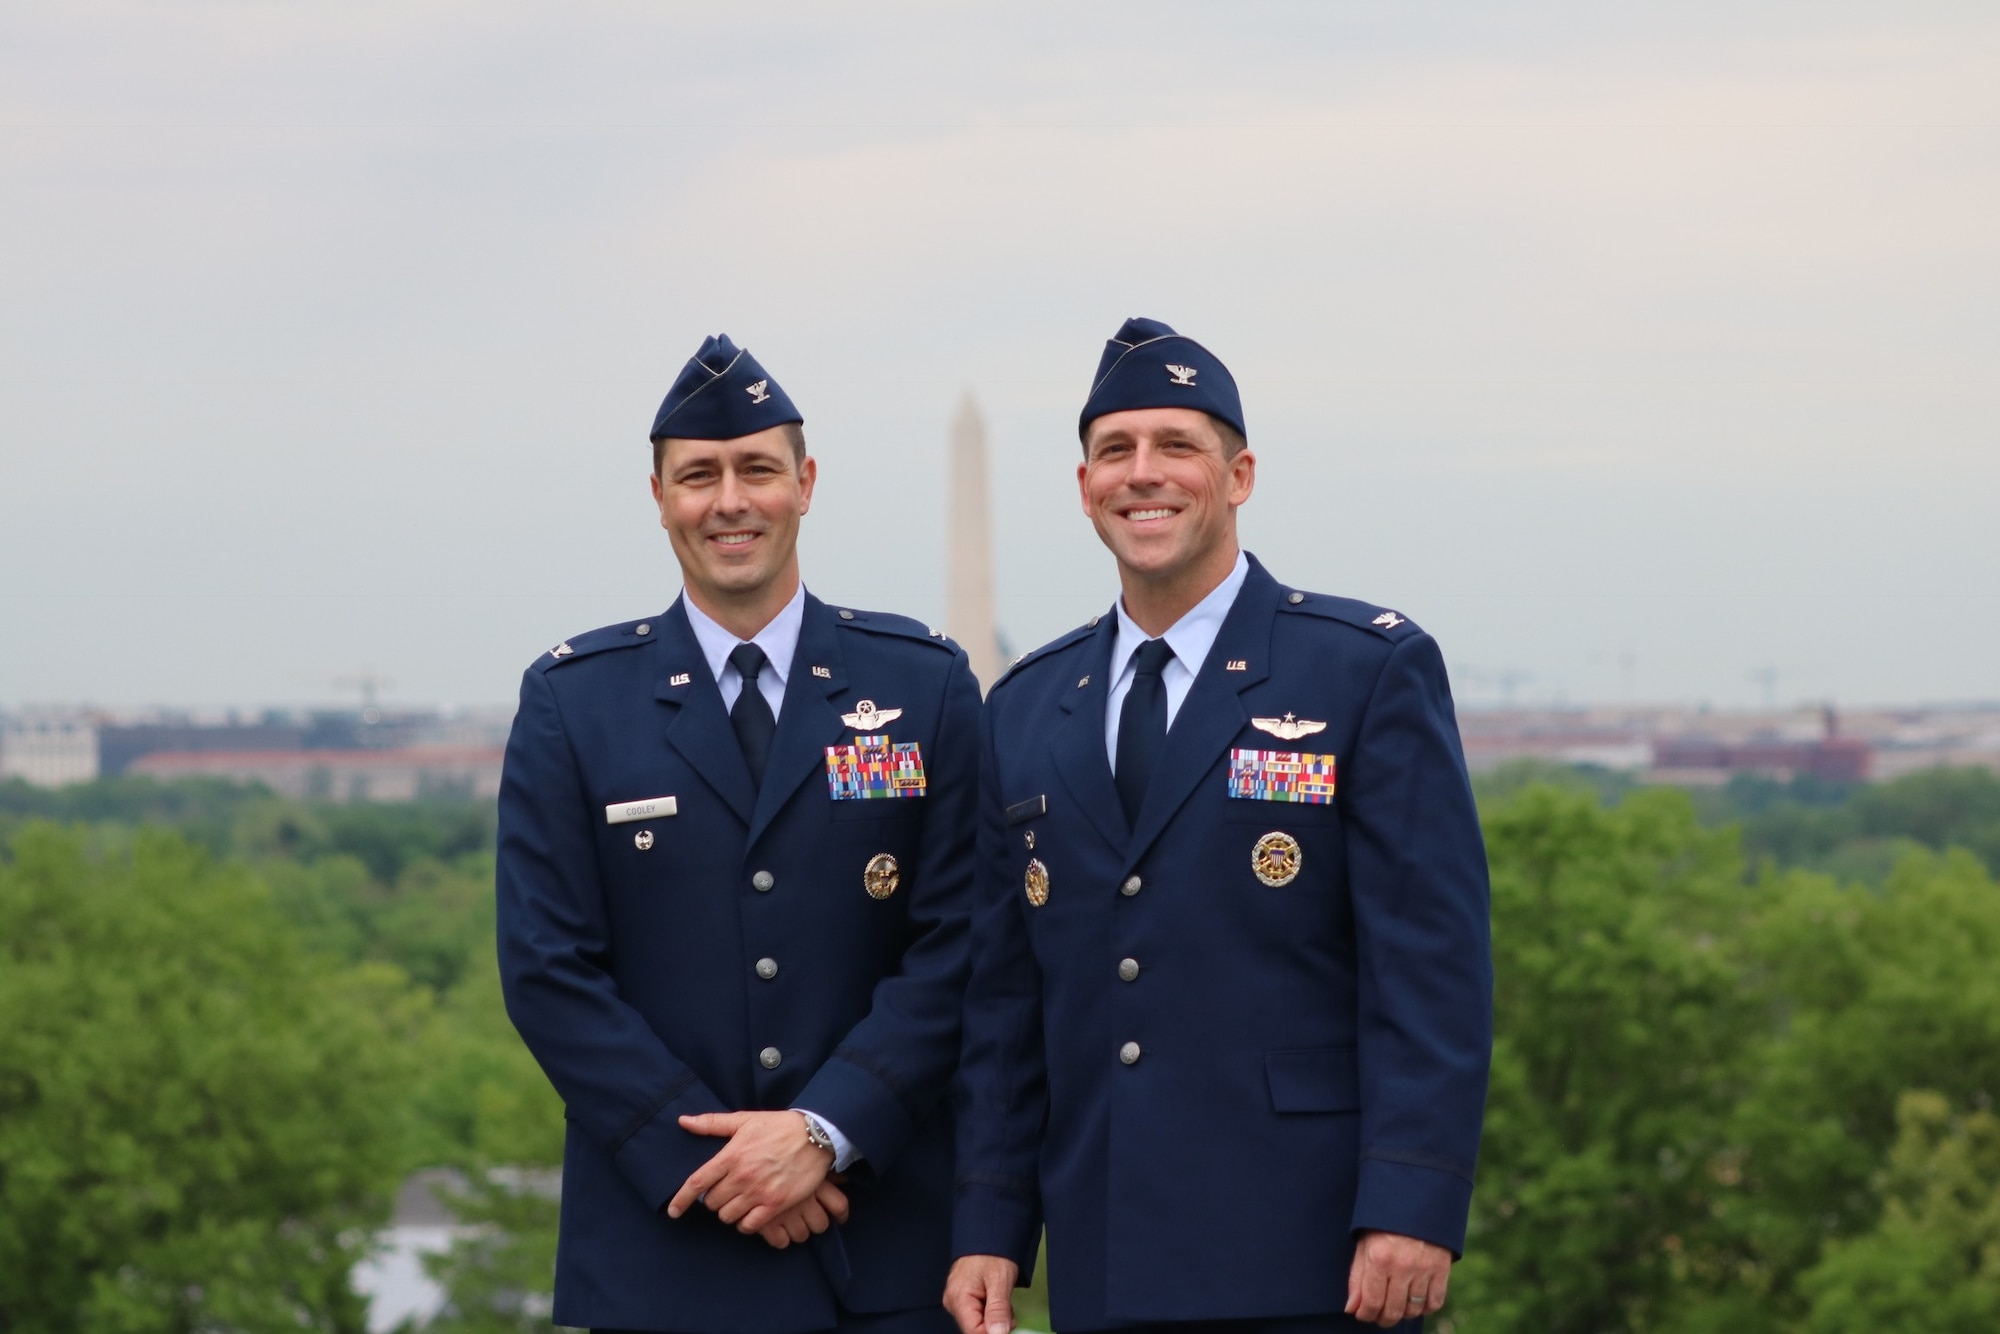 Col. Dan Cooley, a National War College student at Ft. McNair, D.C., and Col. Jason Camilletti, a Marine Corps War College student in Quantico, Va., pause for a photo following their shared